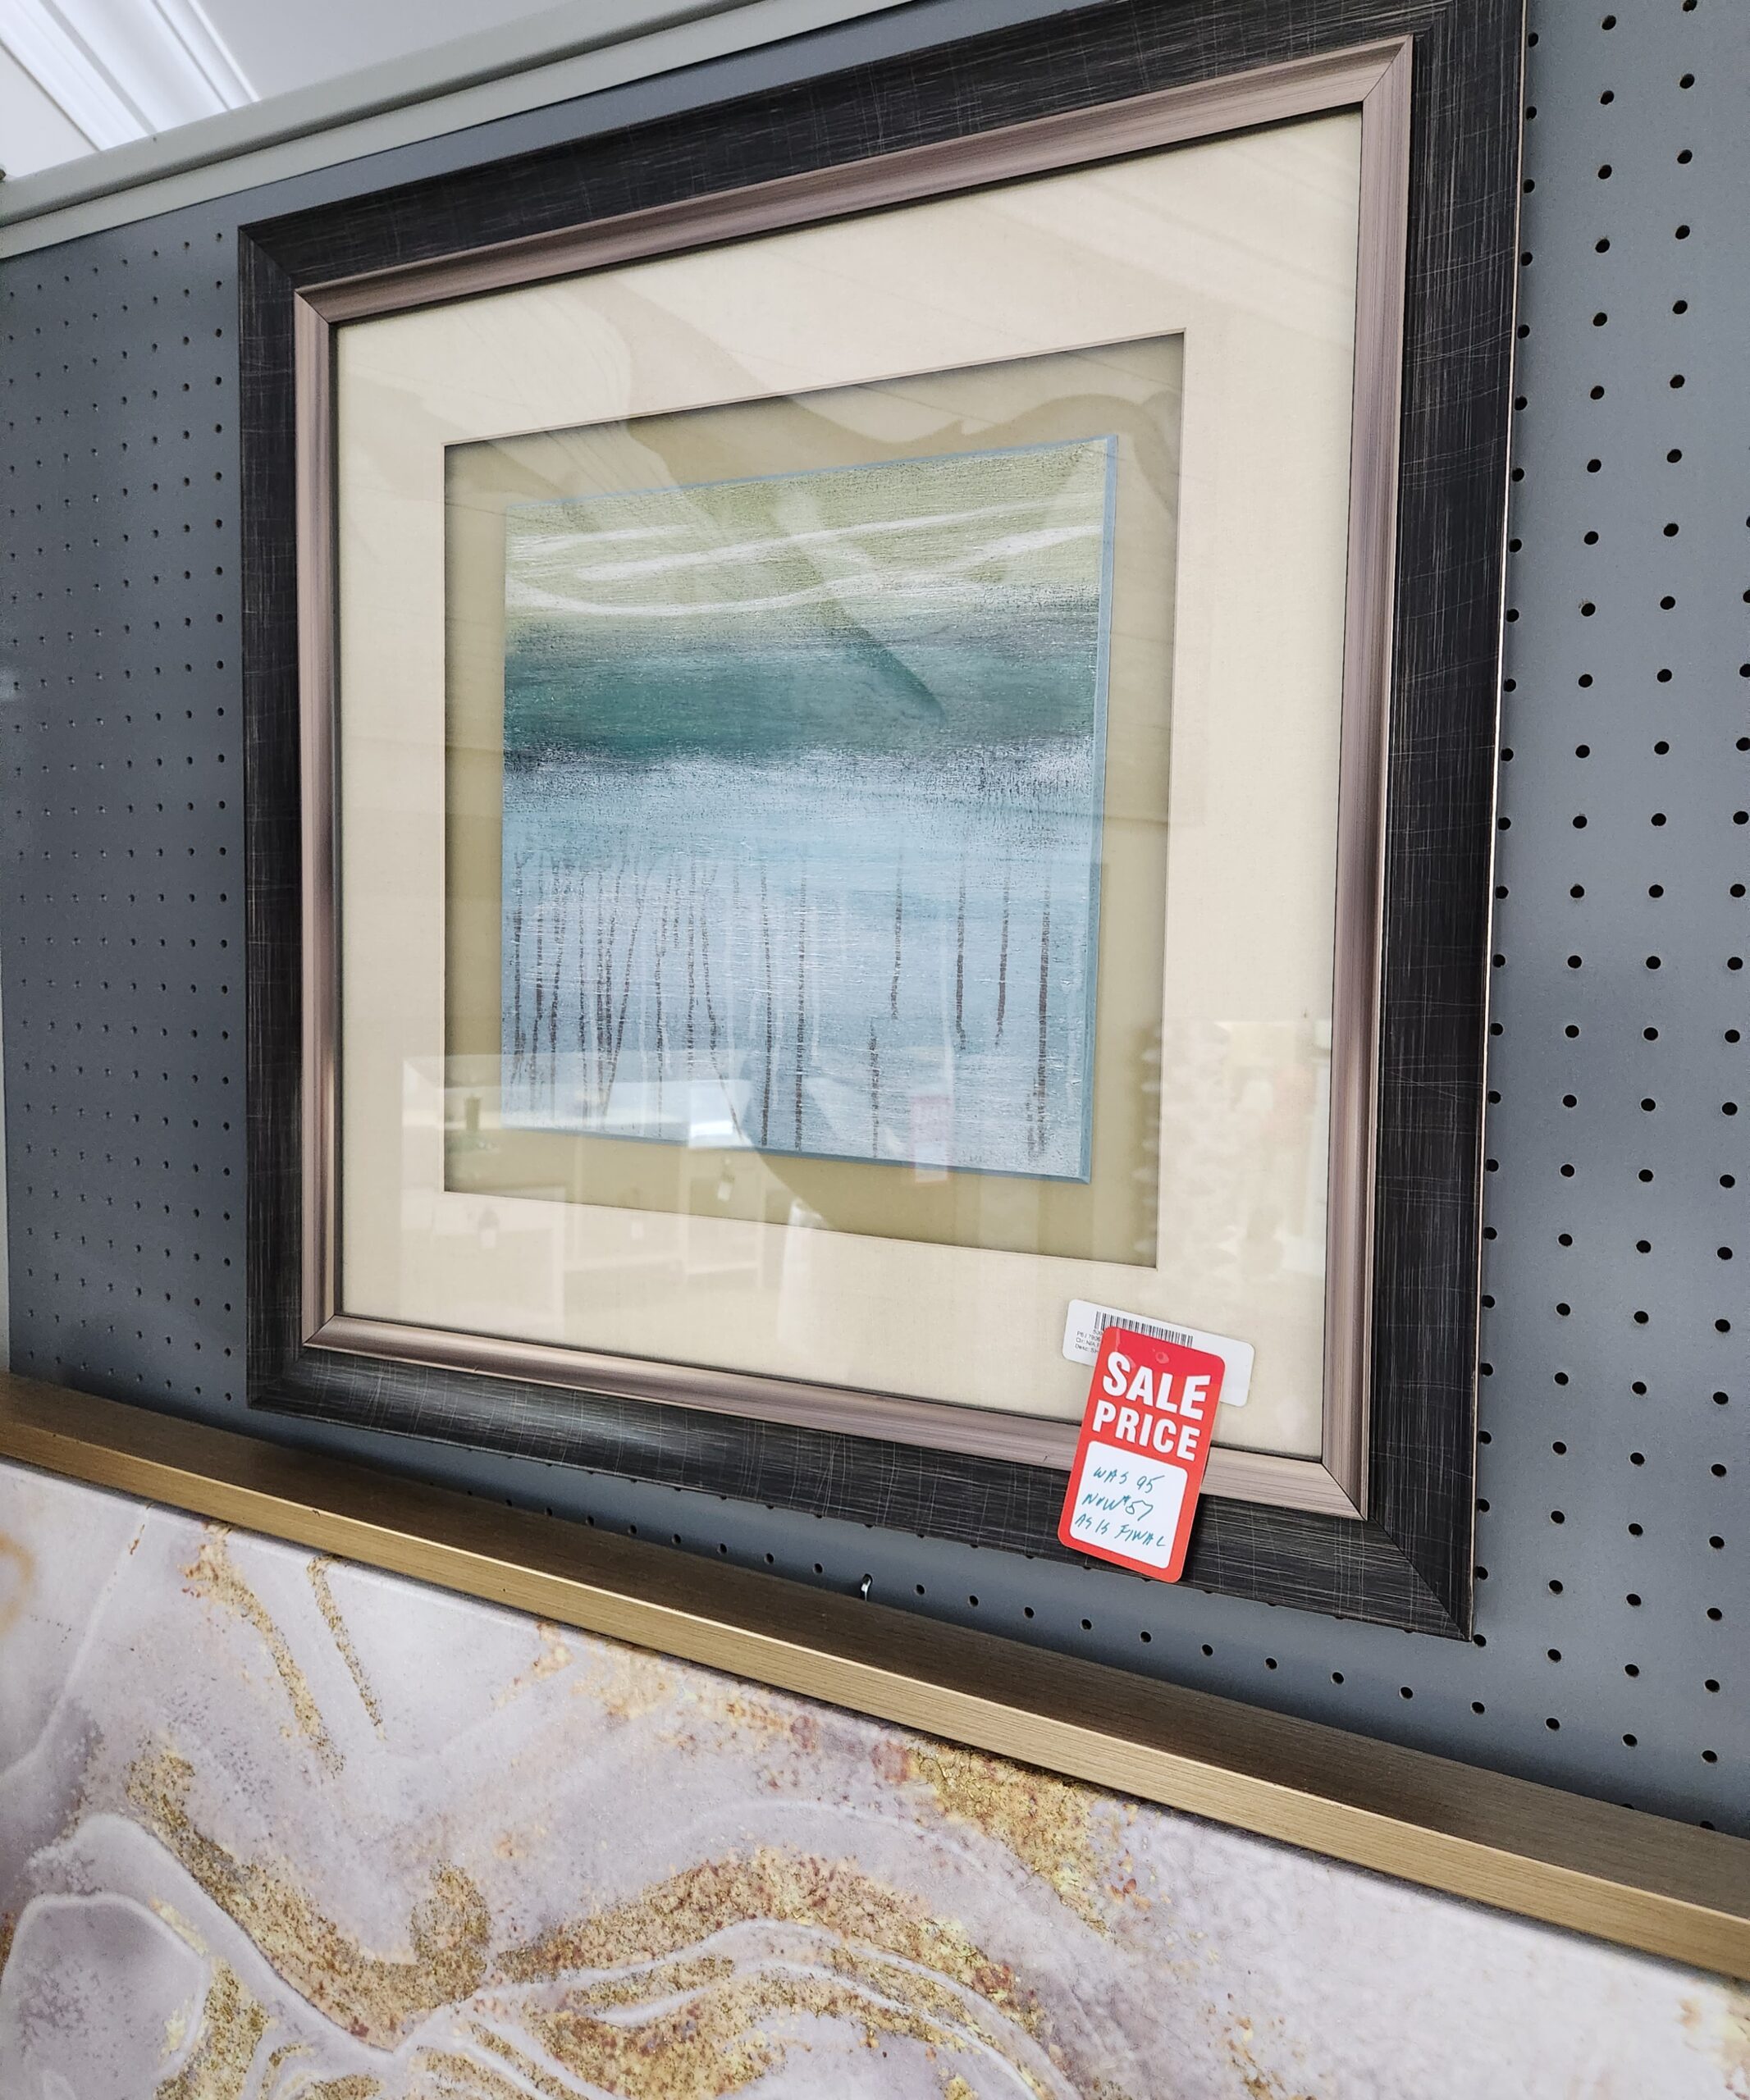 a framed painting on display in a store